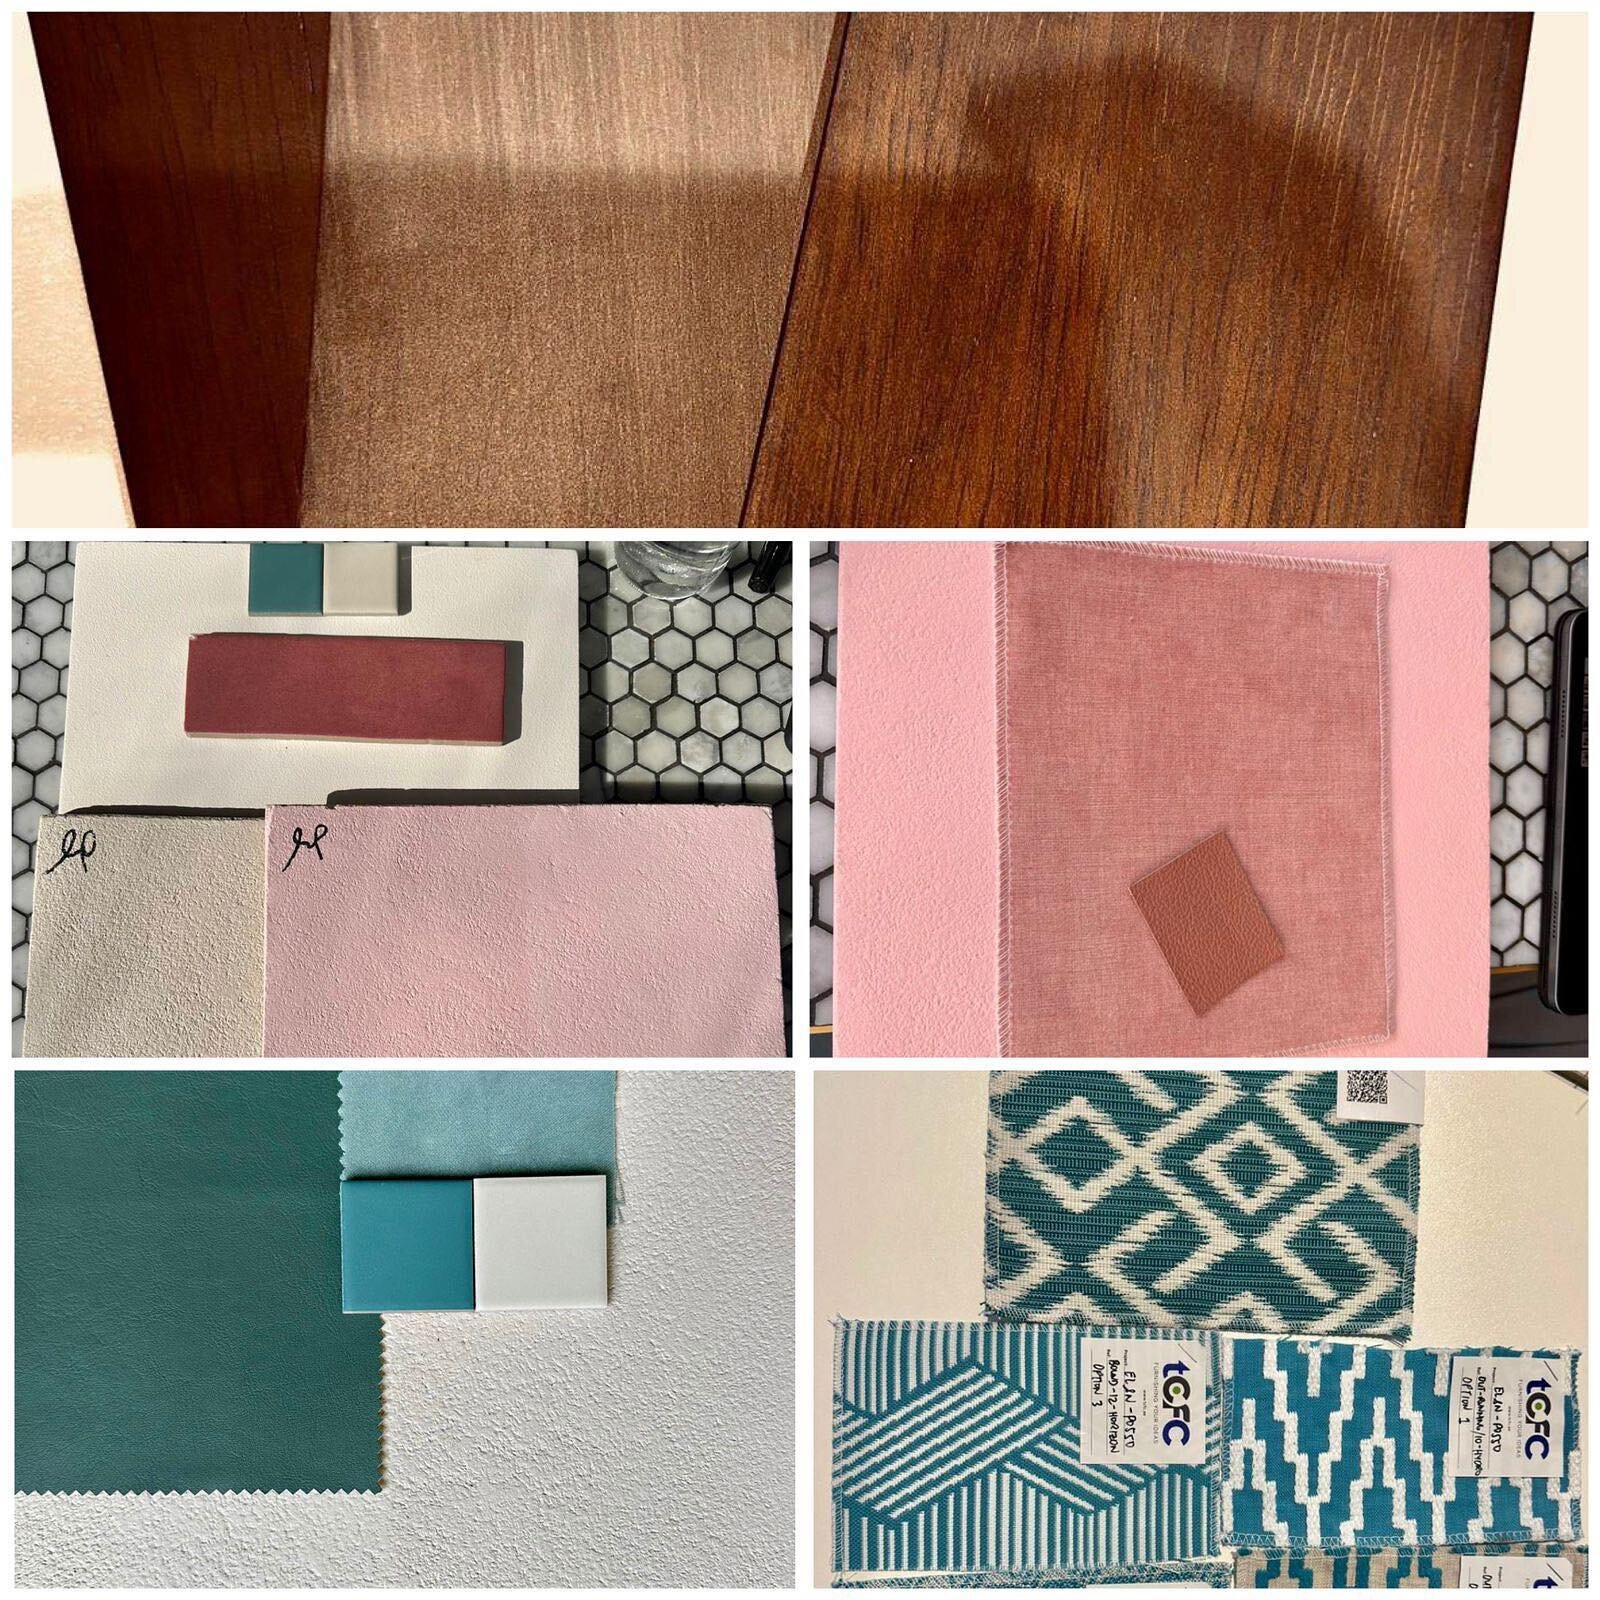 Samples are key to achieving the look you want 👀

Create mood boards, sample books &amp; create the vision 👌

#interiors #samples #designsamples #fitouts #ig #instagram